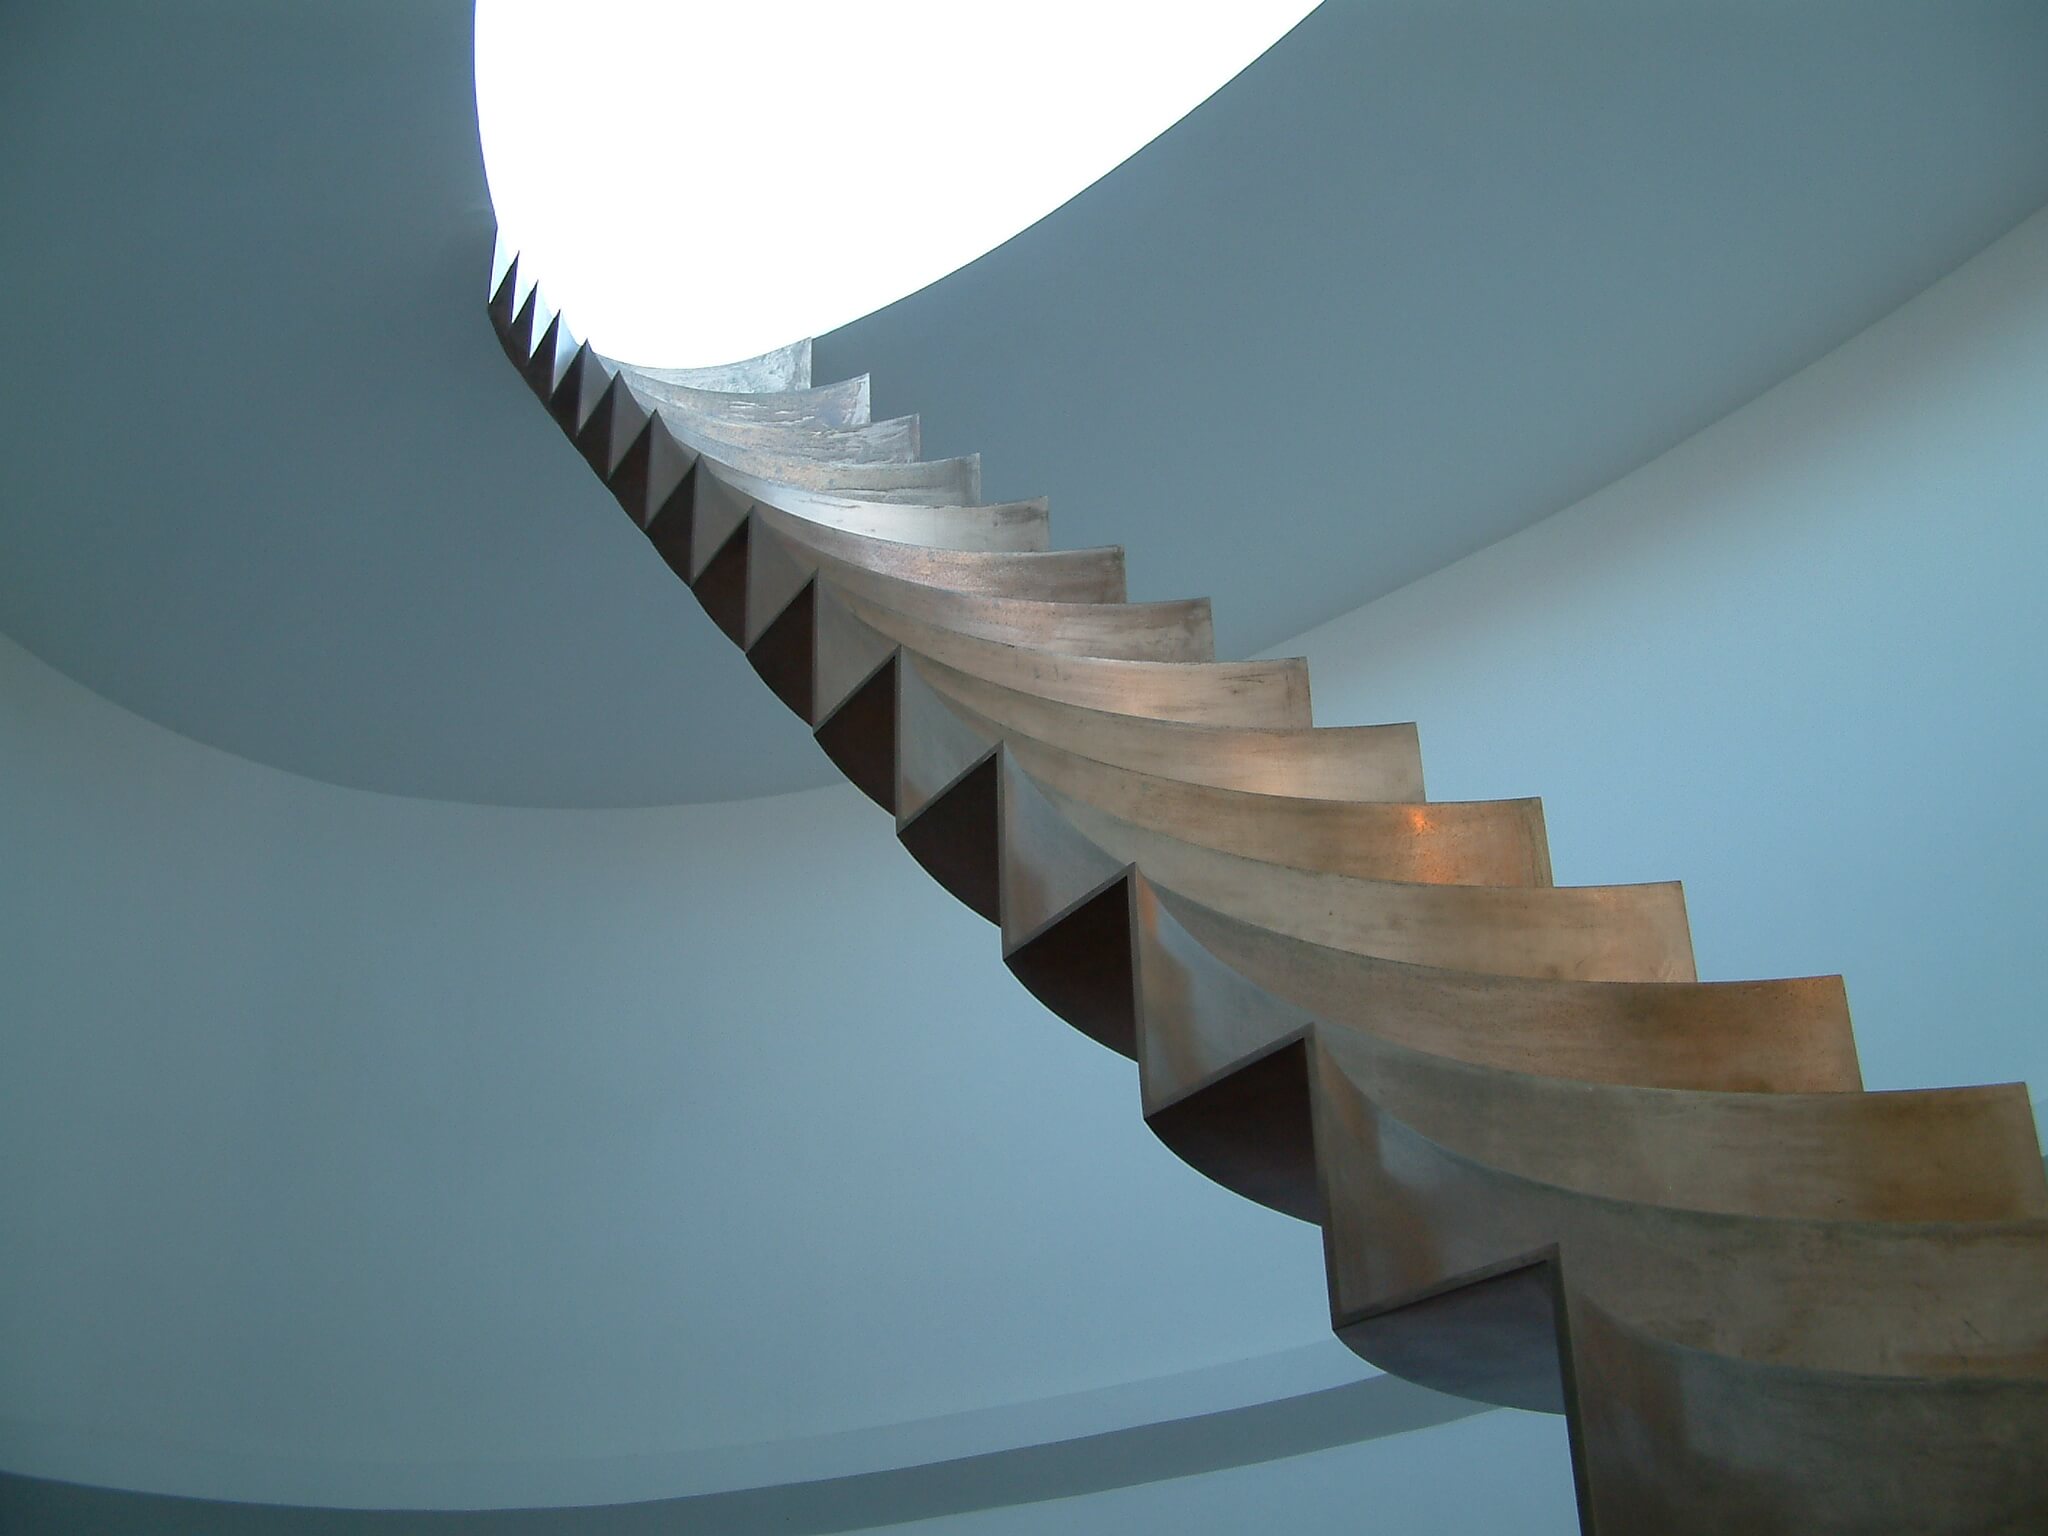 Metal stairs leading to an oval hole in the ceiling built by a design and engineering company